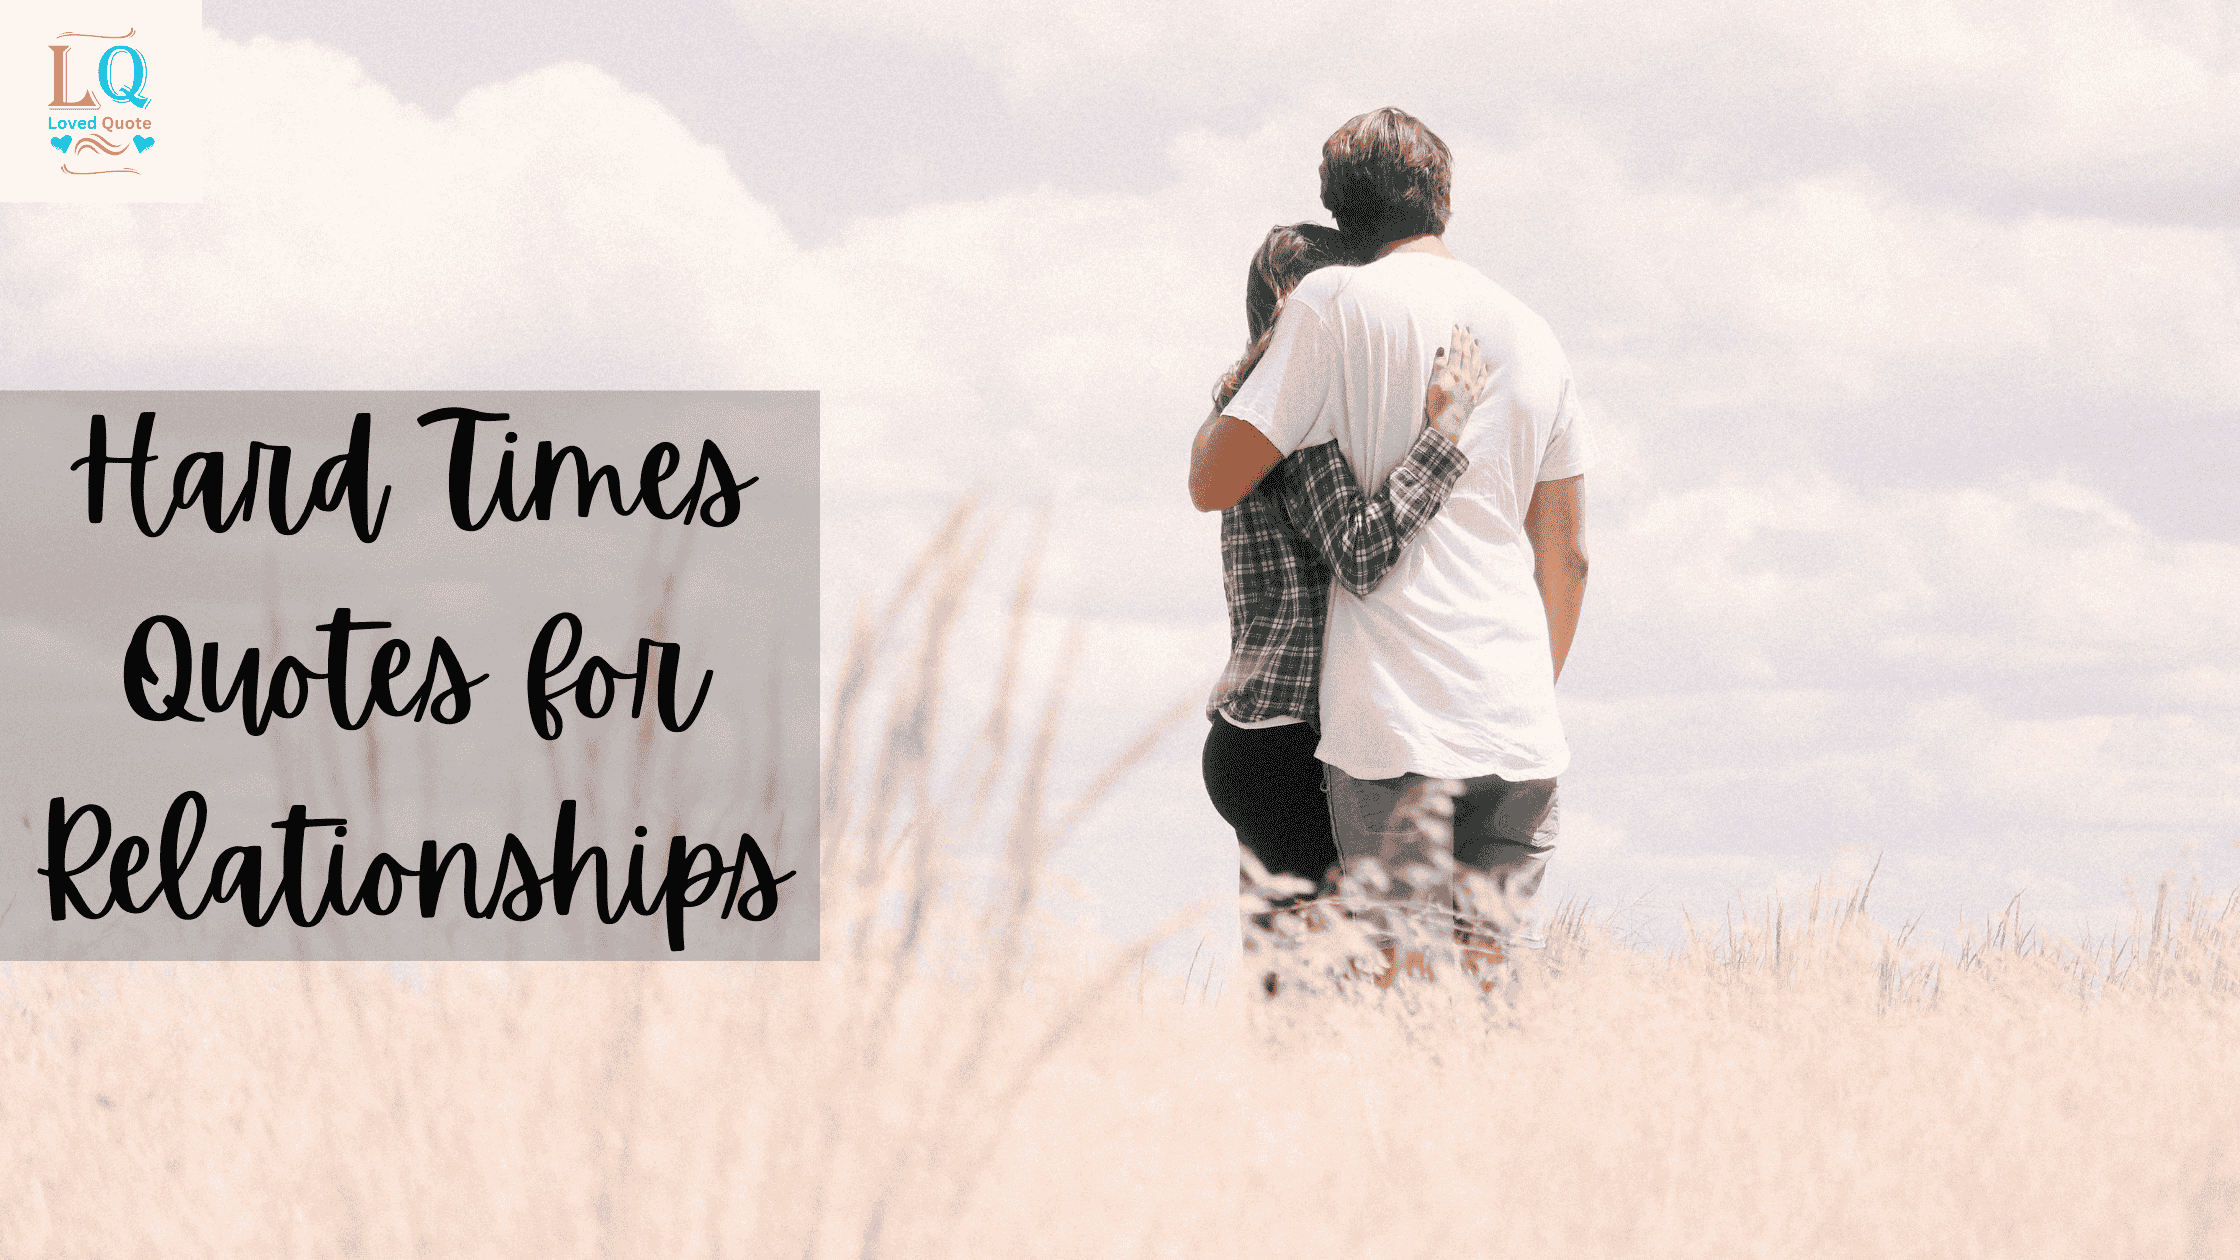 Hard Times Quotes for Relationships